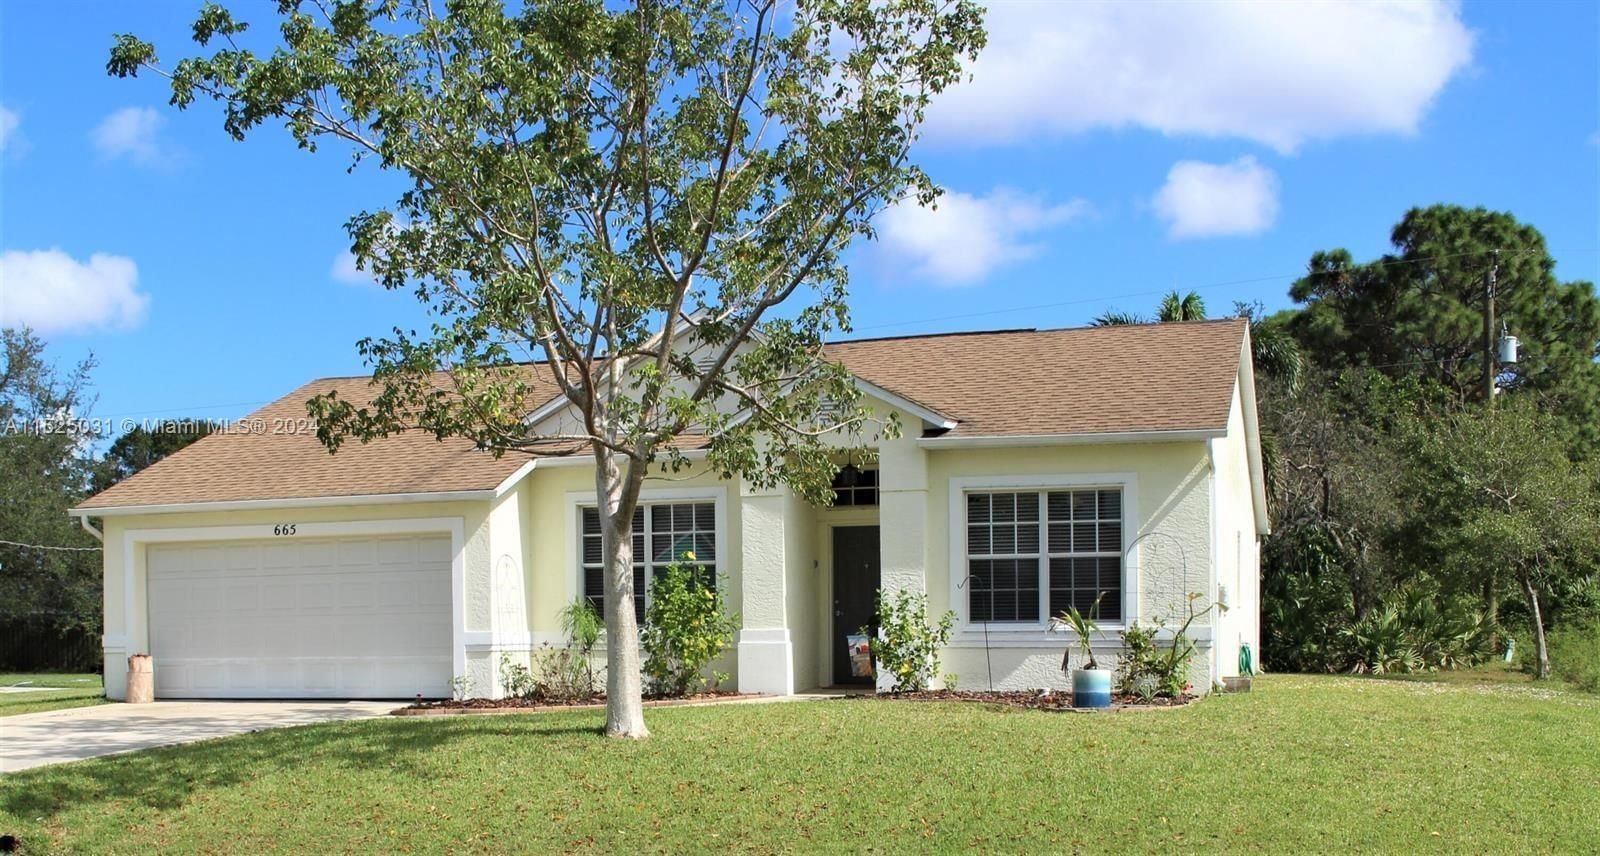 Real estate property located at 665 Horizon Ln, St Lucie County, PORT ST LUCIE SECTION 26, Port St. Lucie, FL